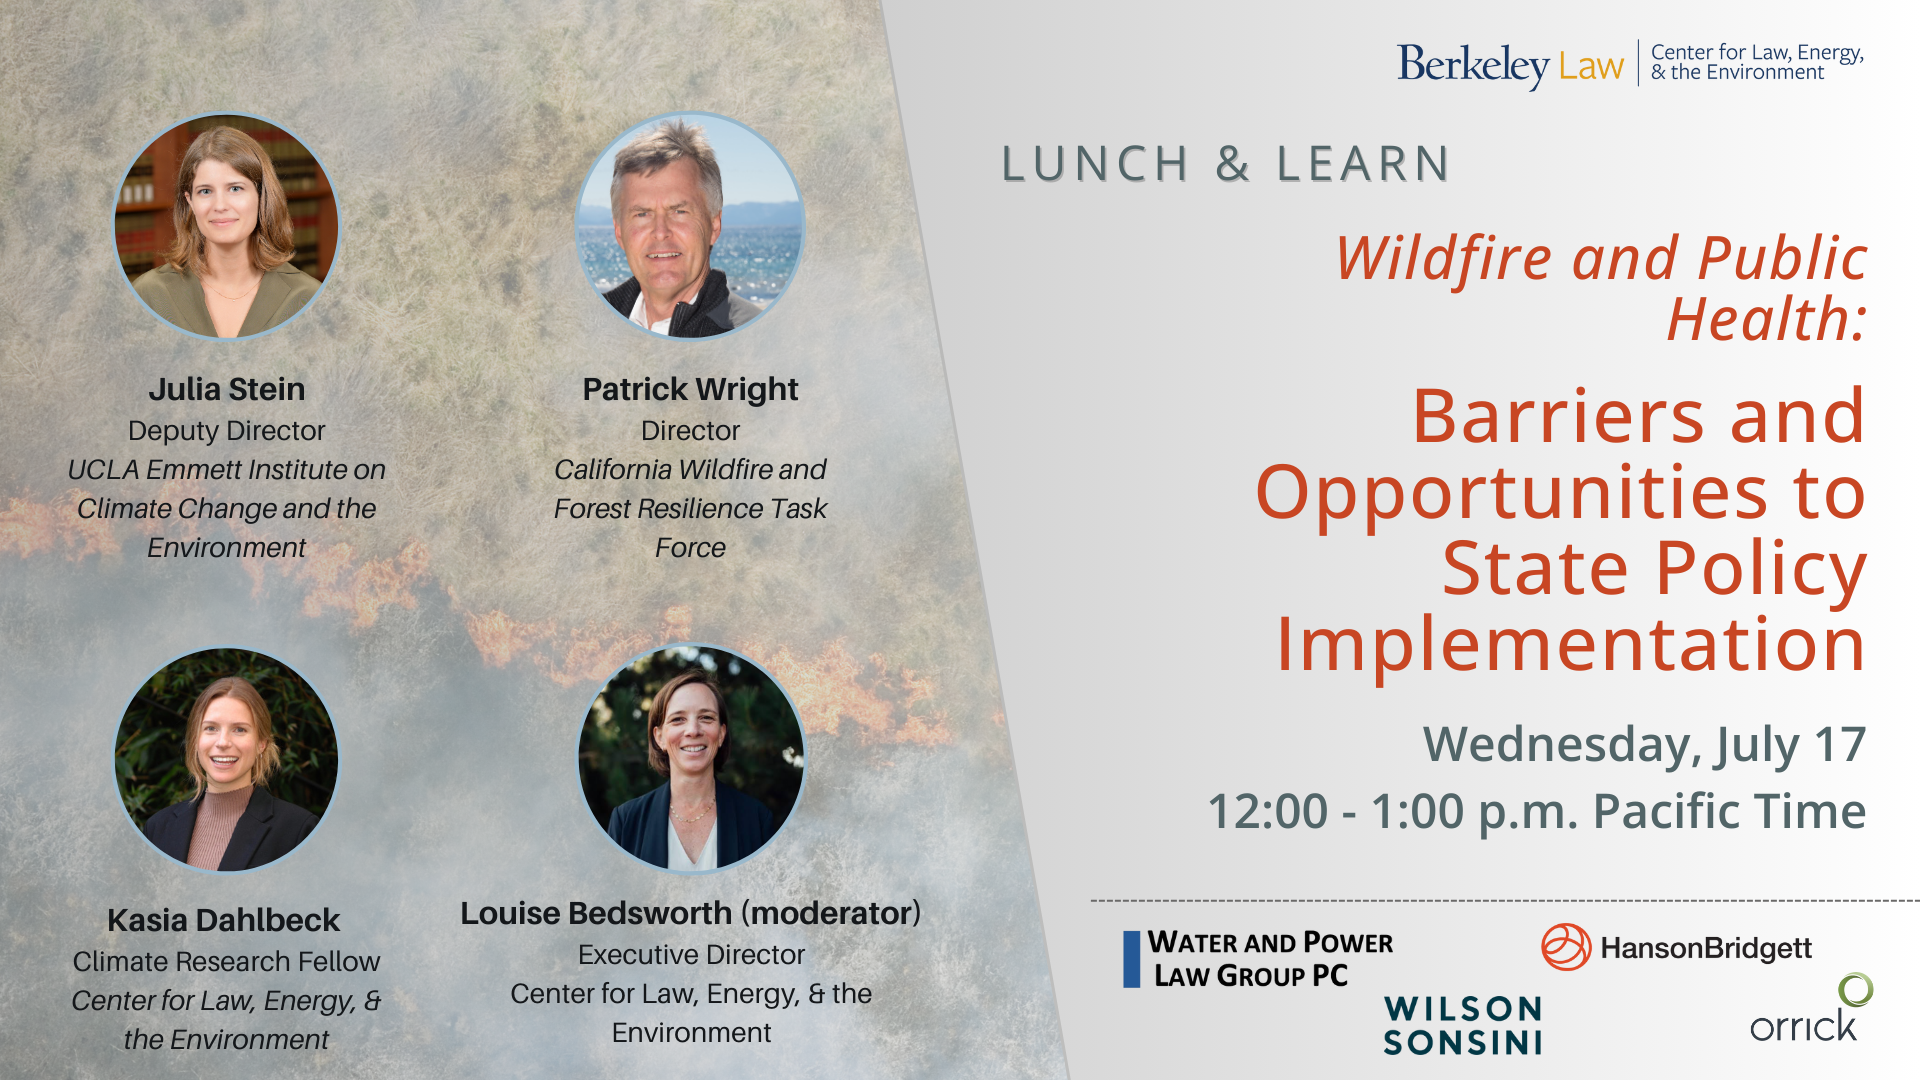 Lunch & Learn: Wildfire and Public Health, Barriers and Opportunities to State Policy Implementation on a white background with our four panelists listed on the left.